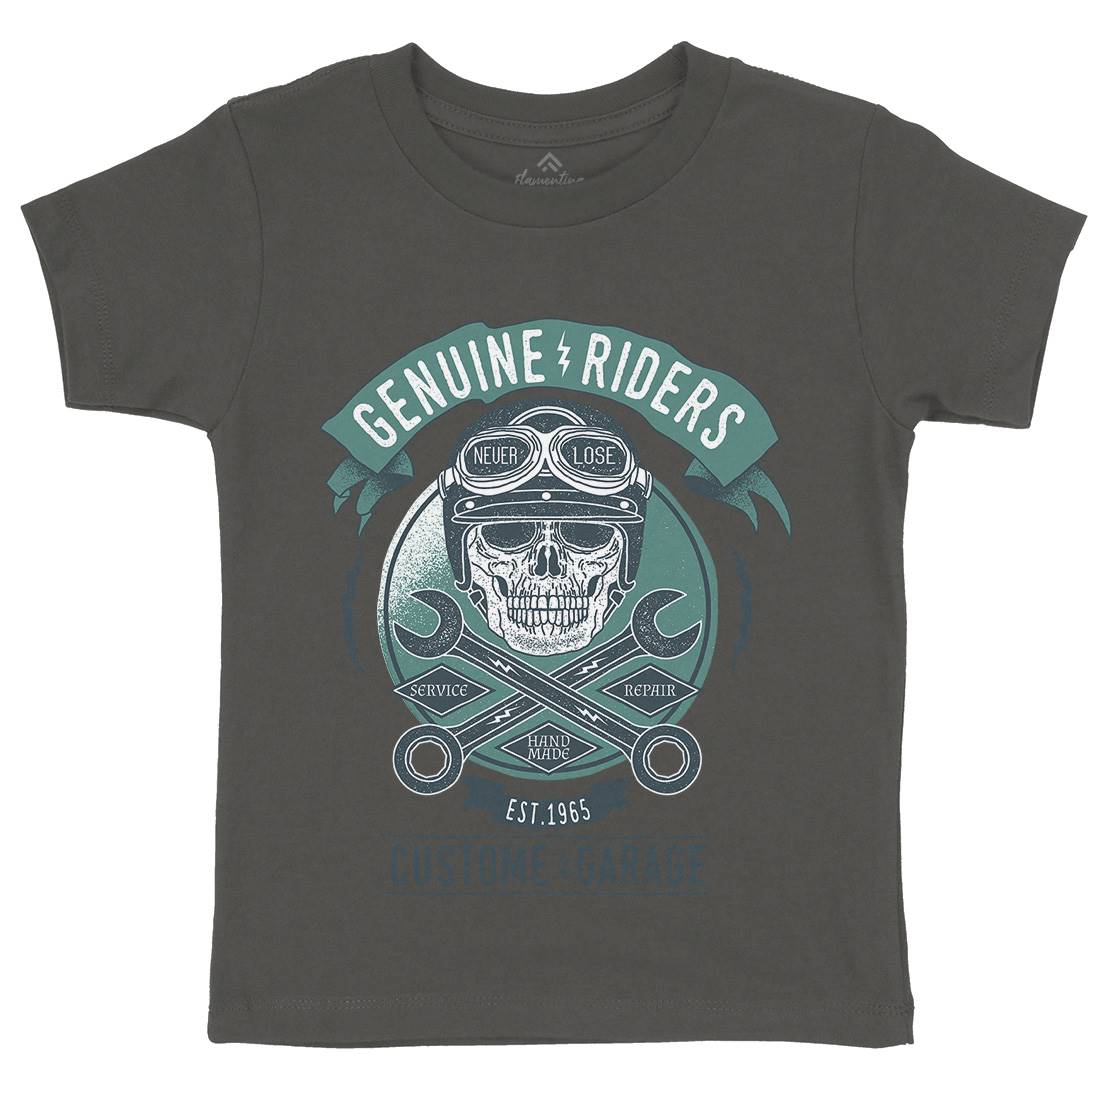 Genuine Riders Kids Crew Neck T-Shirt Motorcycles A984